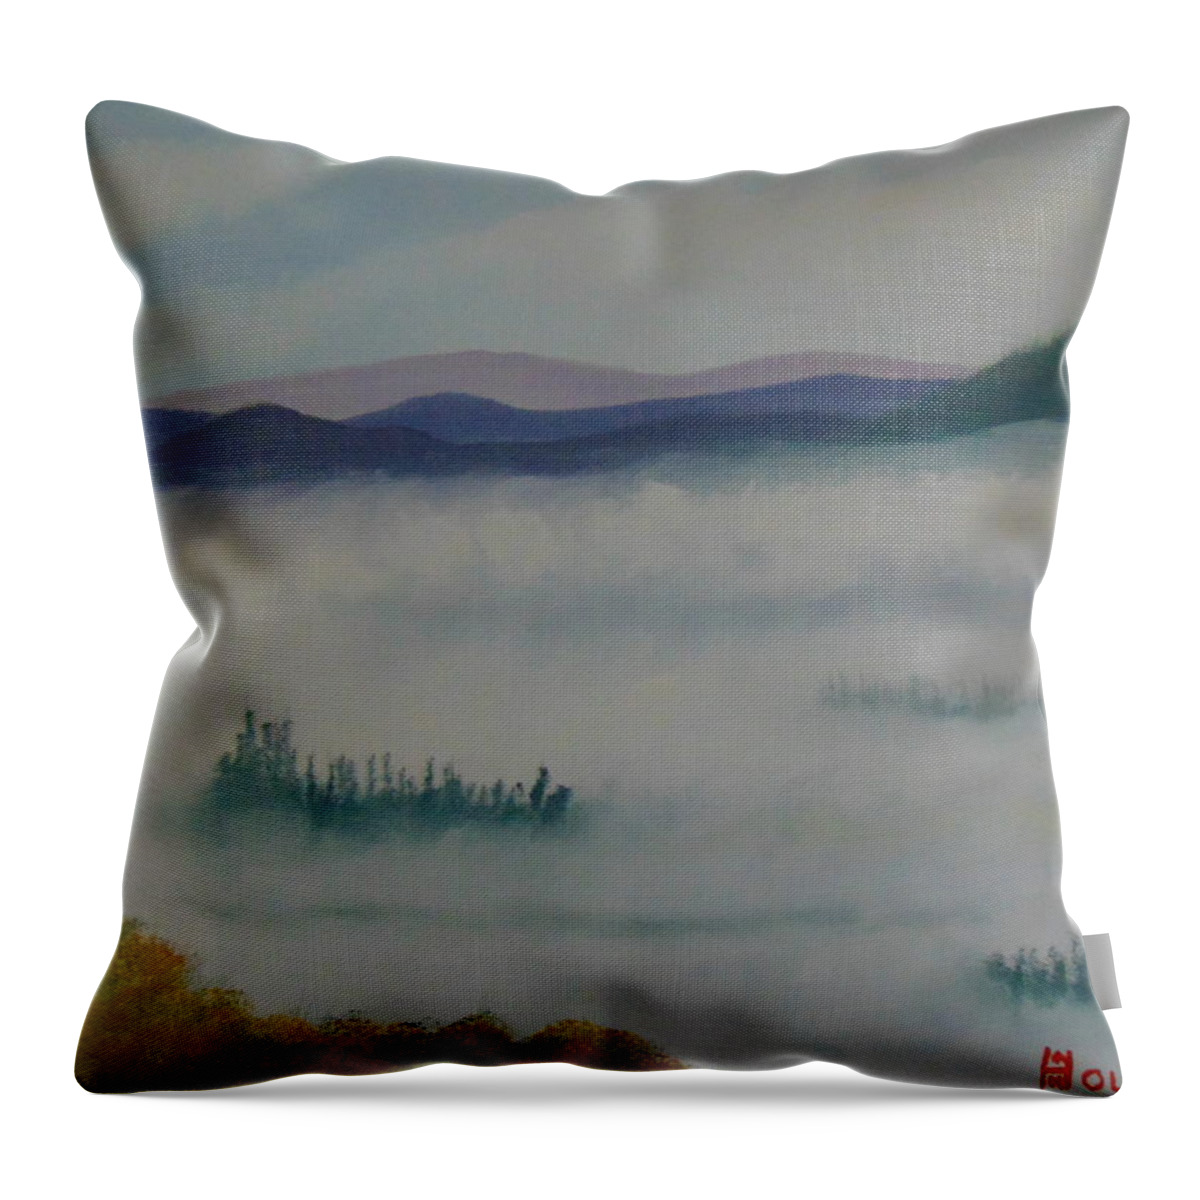 Bob Ross Style Throw Pillow featuring the painting Above The Clouds by Alan K Holt